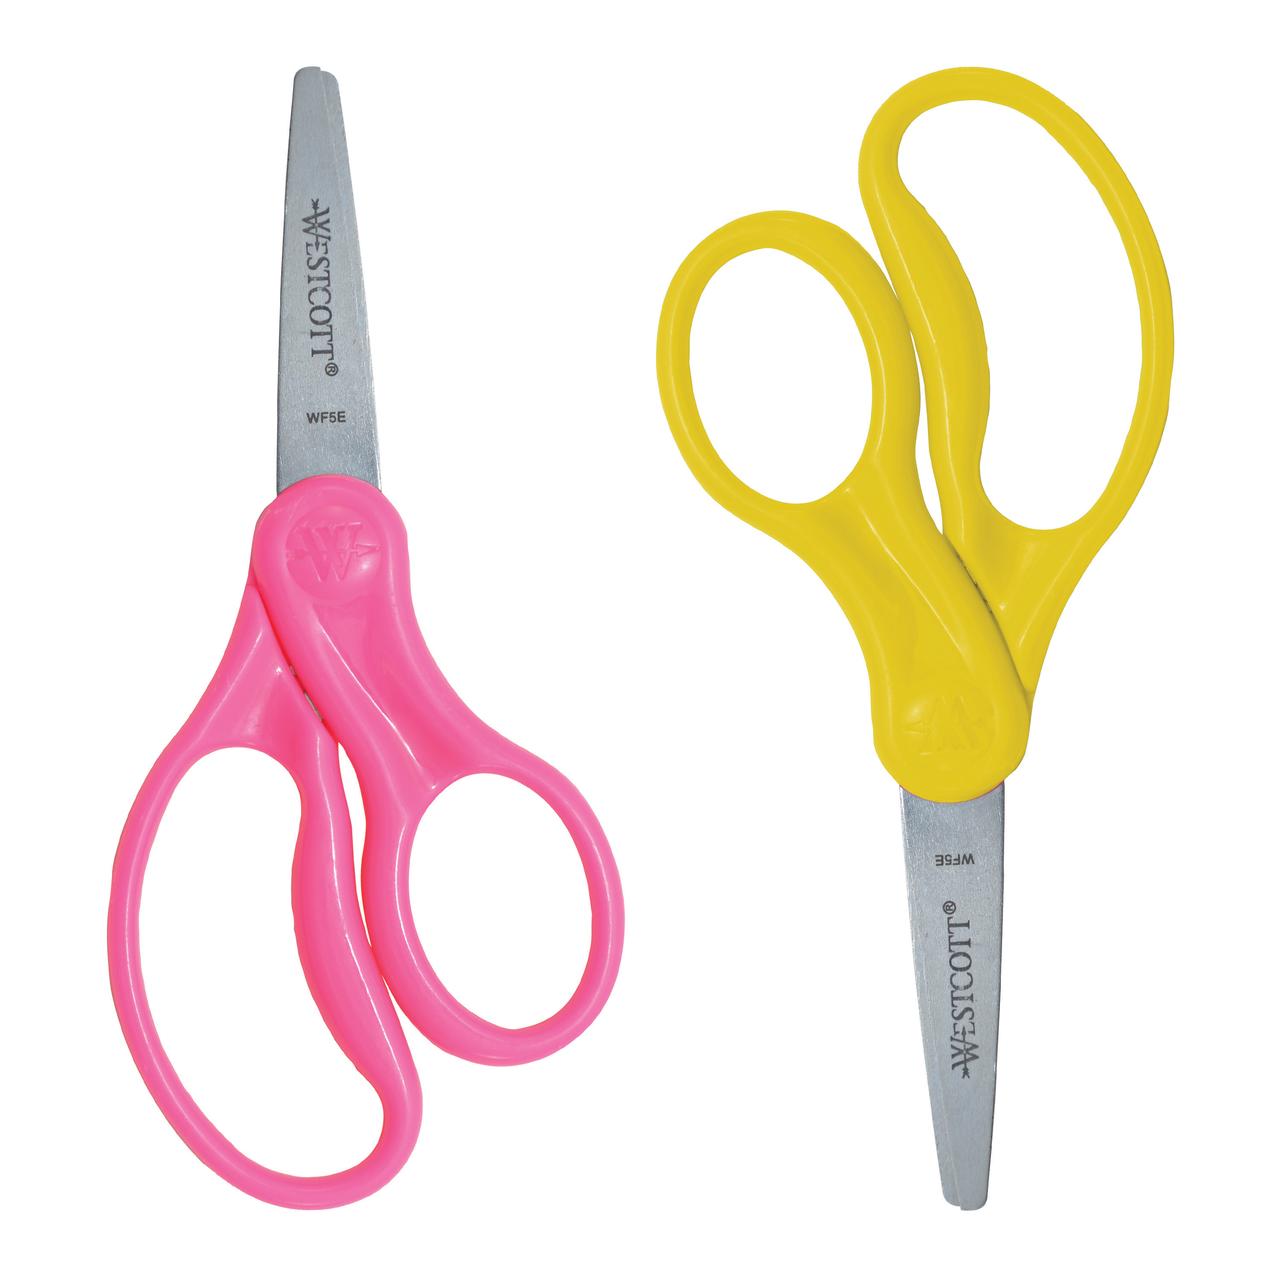 Westcott® Hard Handle Kids Value Scissors, 5", Pointed, Assorted Colors, 2 Pack - image 4 of 9